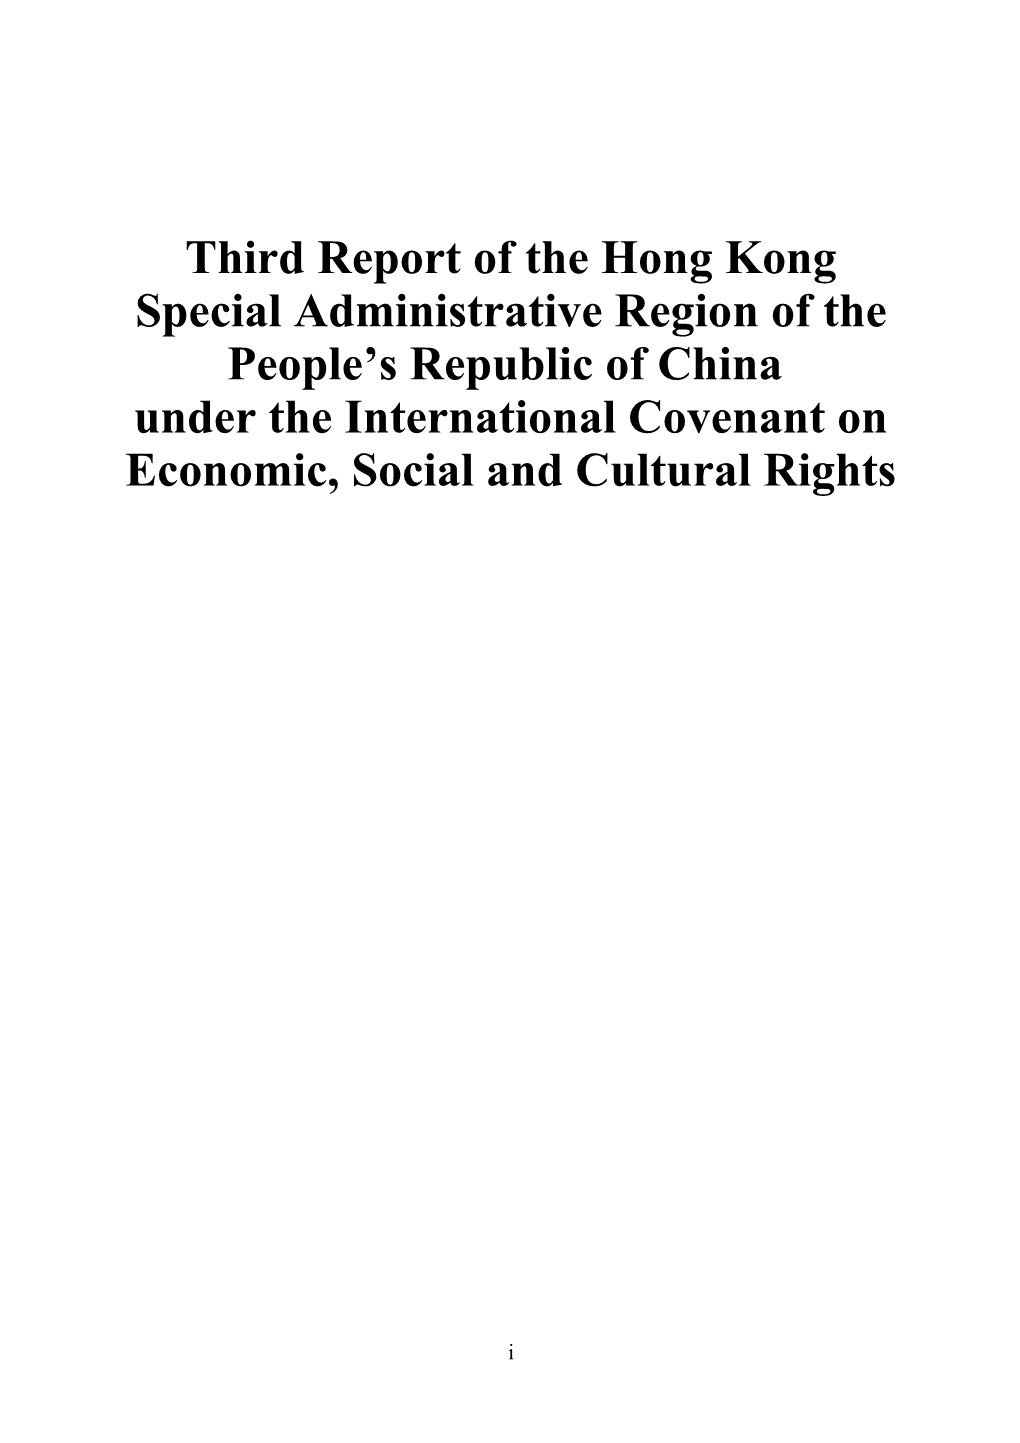 Thirdreport of the Hong Kong Special Administrative Region of the People S Republic of China